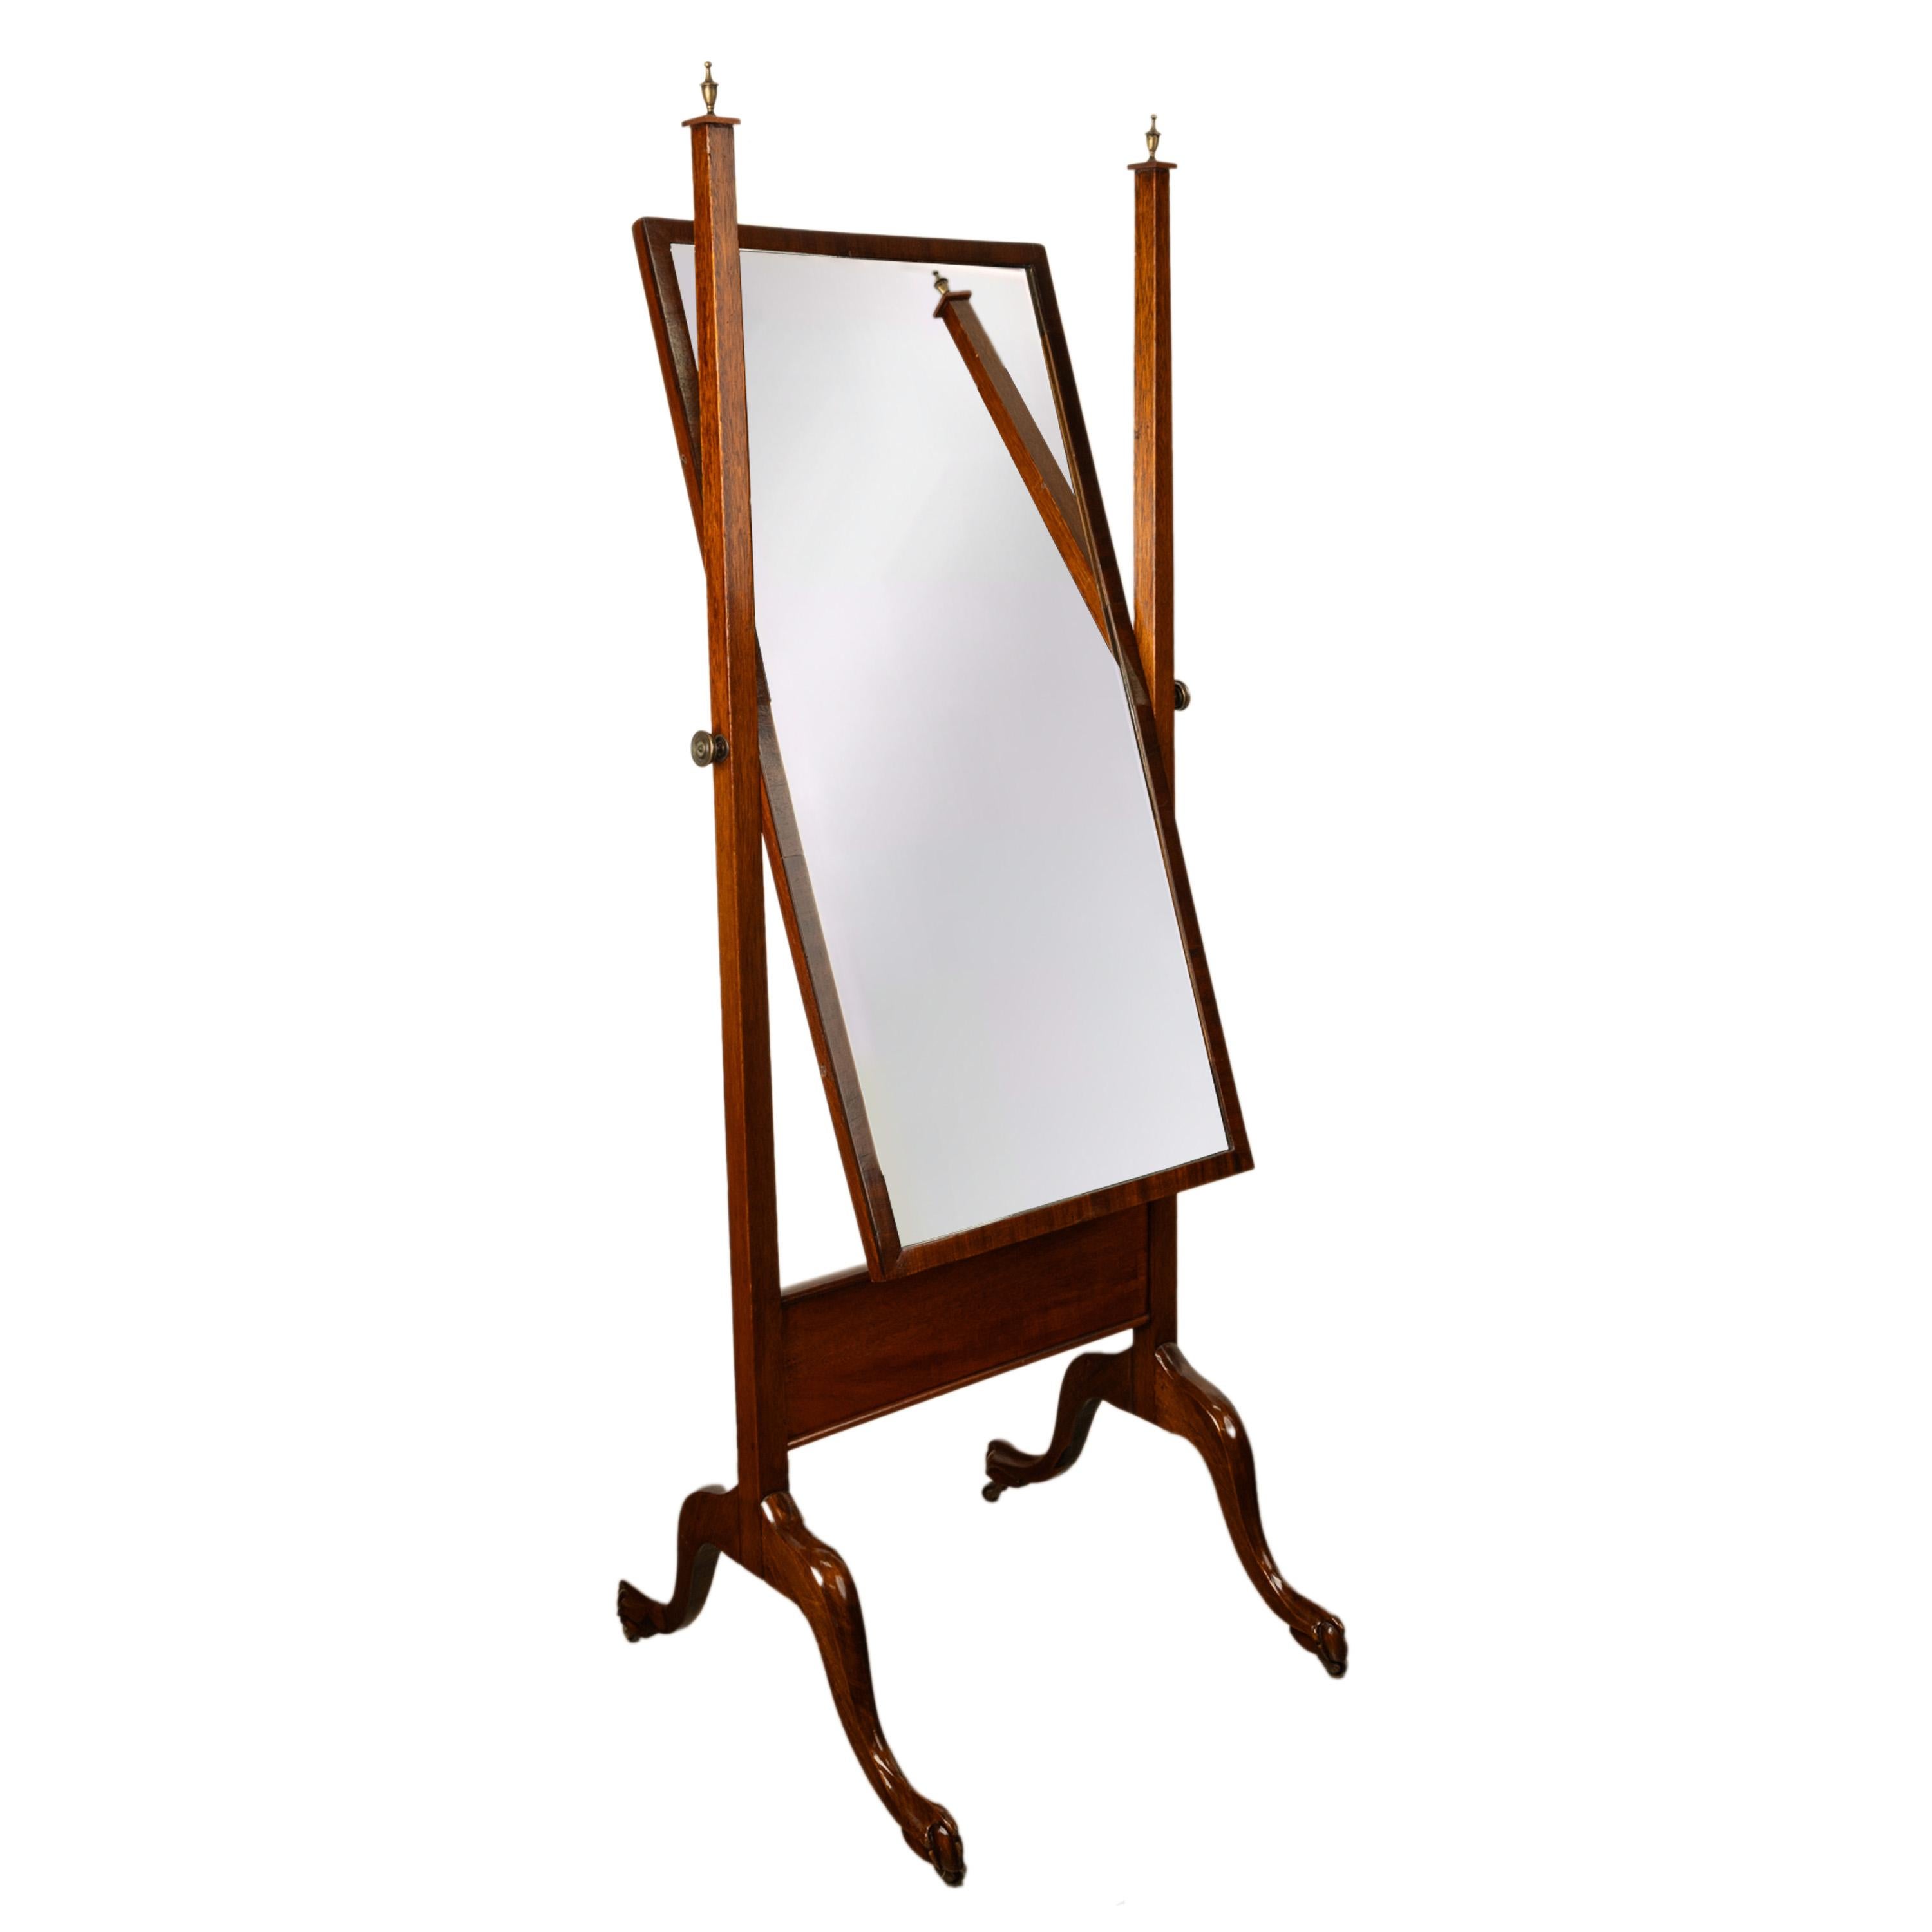 Early 19th Century Antique English Georgian Regency Mahogany Cheval Full Length Swing Mirror 1820 For Sale